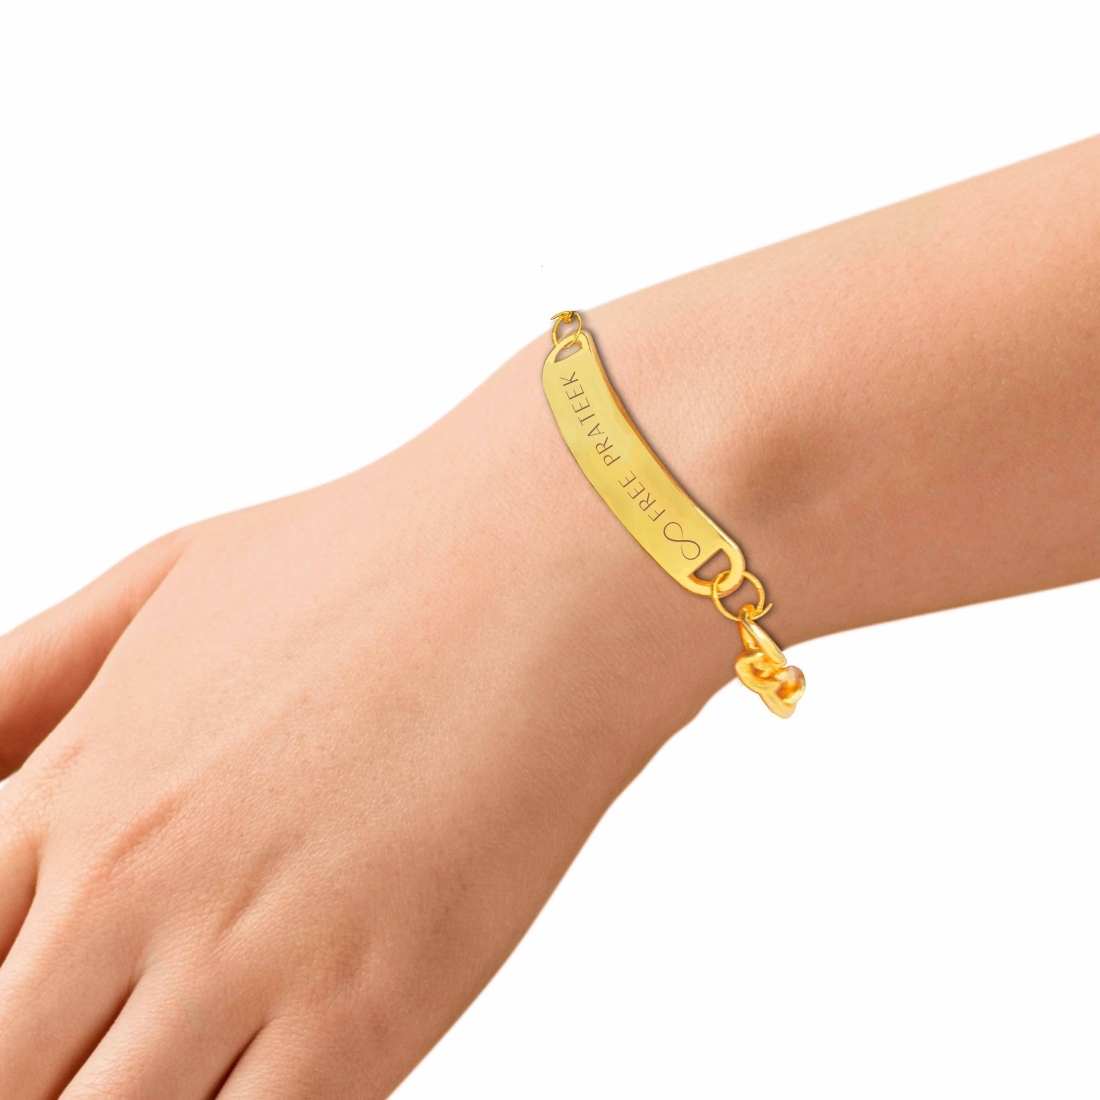 Top more than 82 personalized infinity bracelet latest - in.eteachers